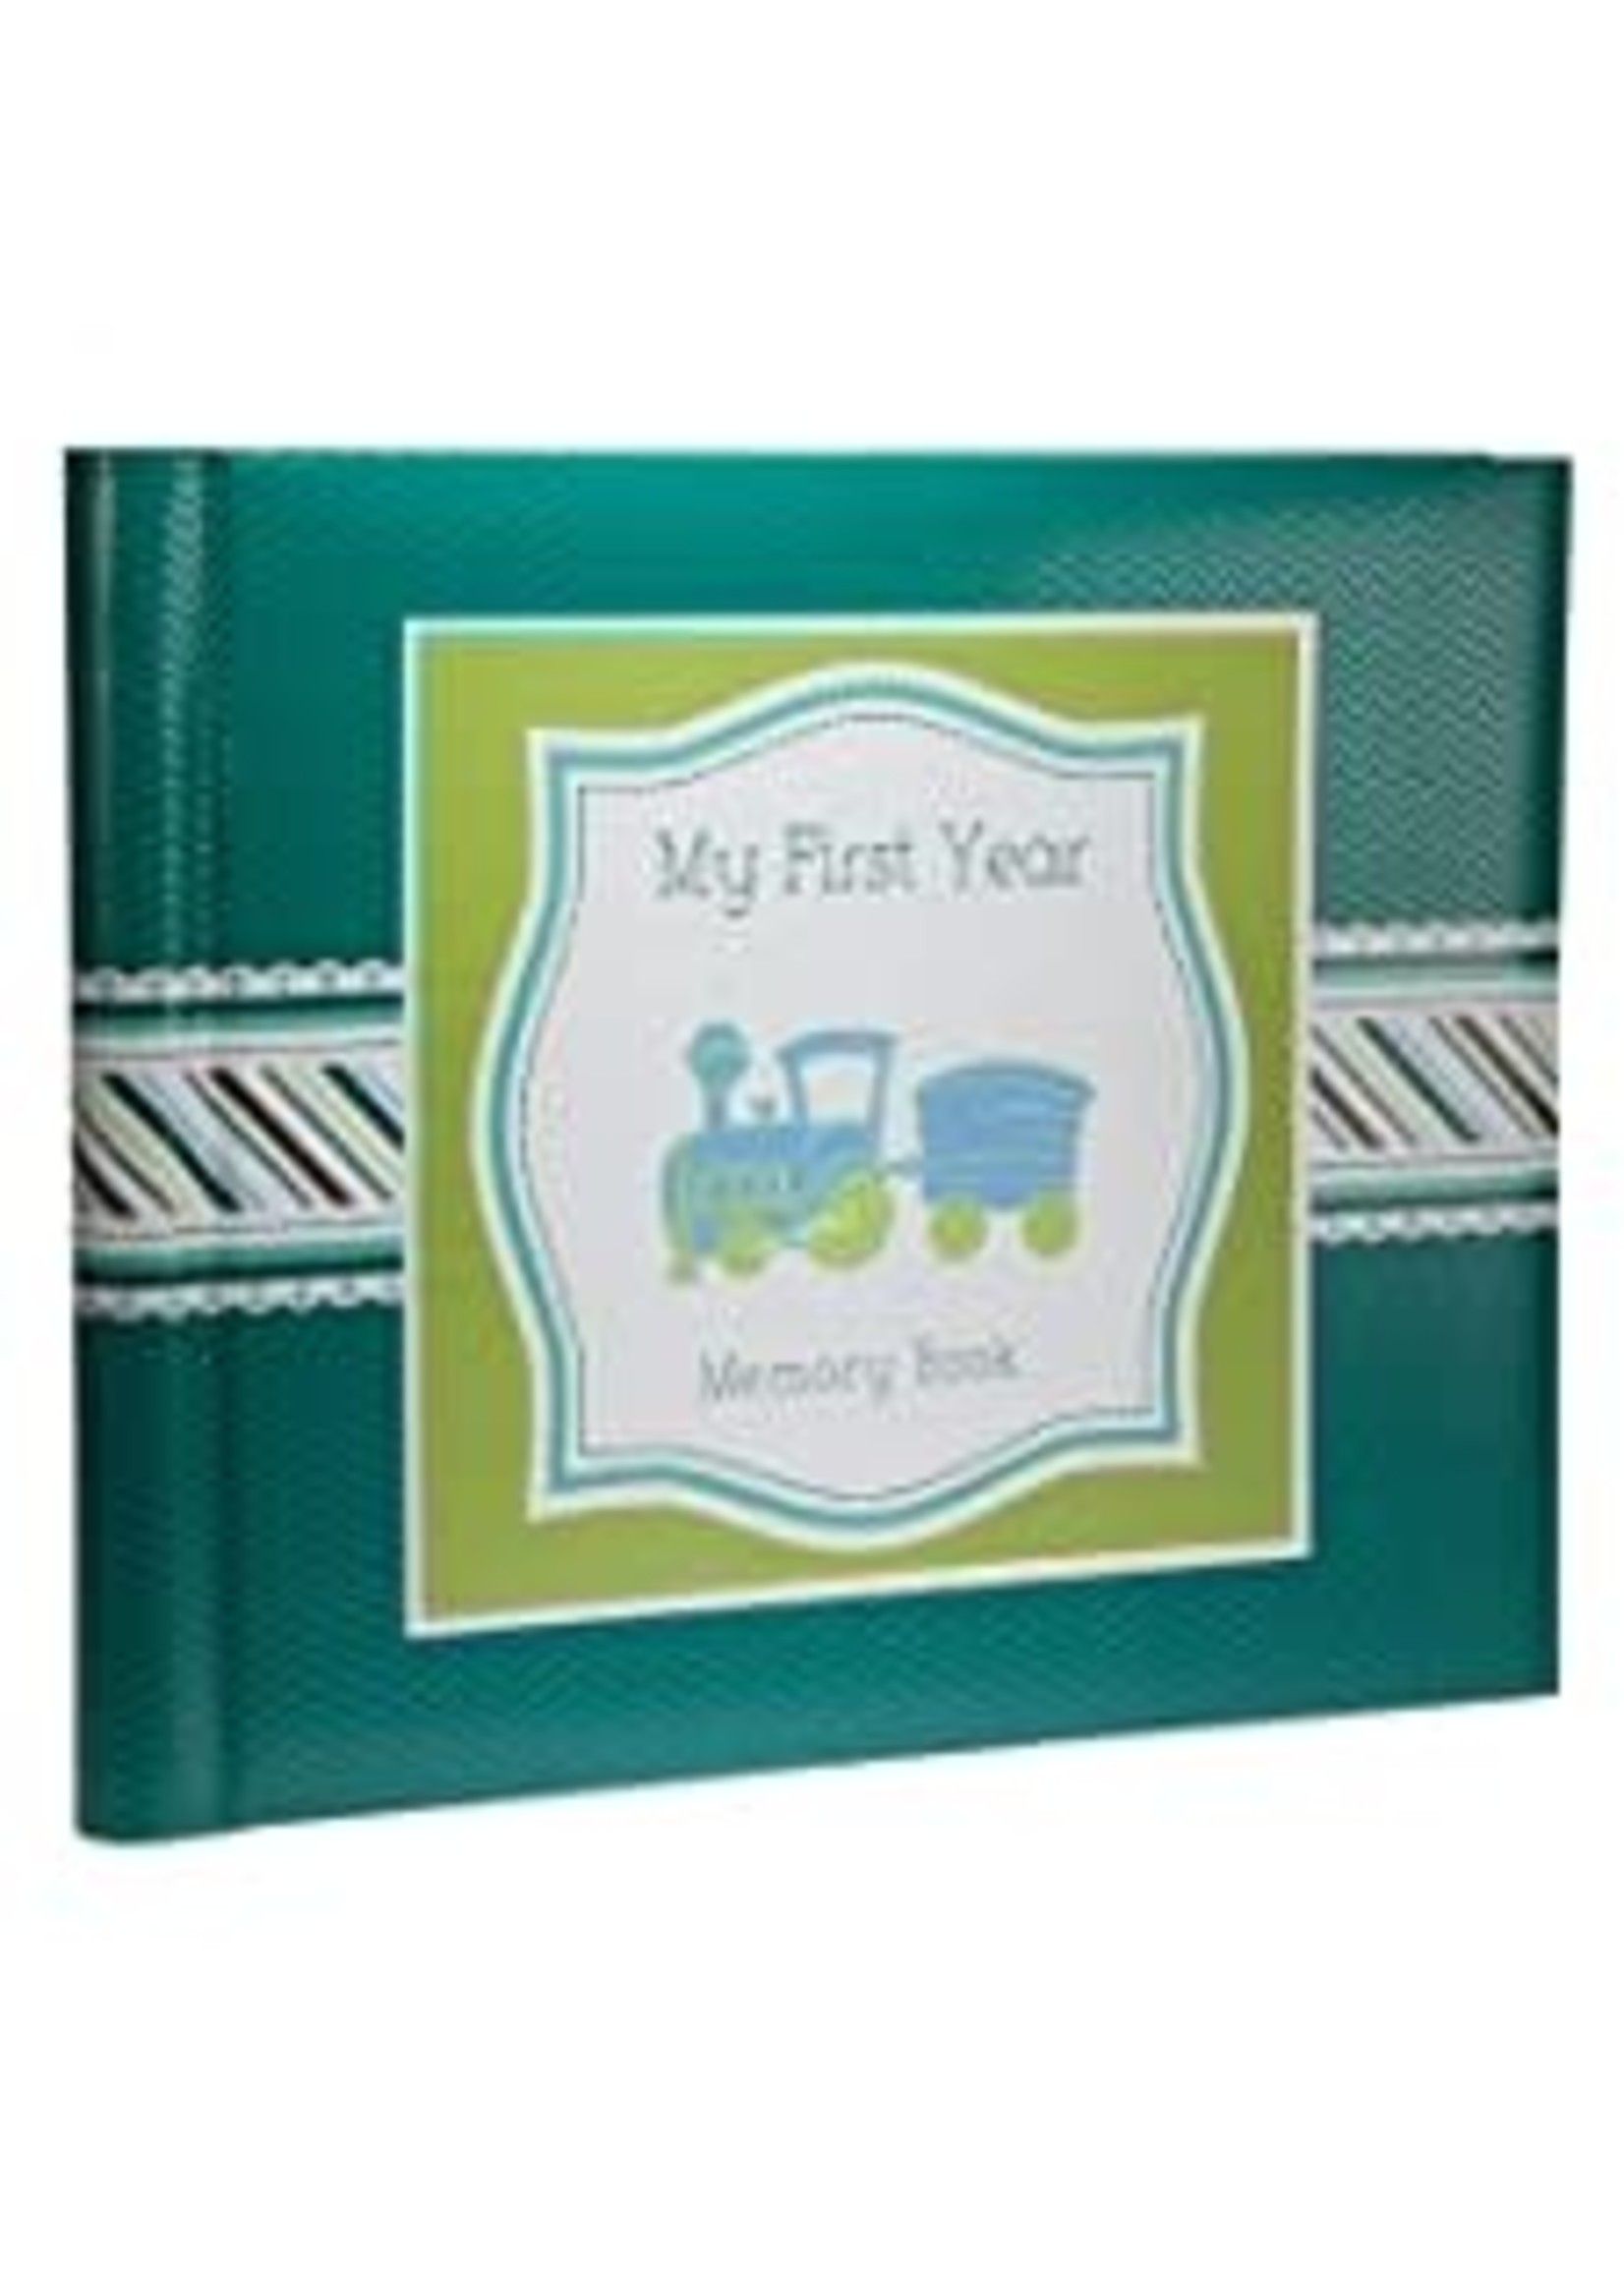 My First Year Memory Book (train set)